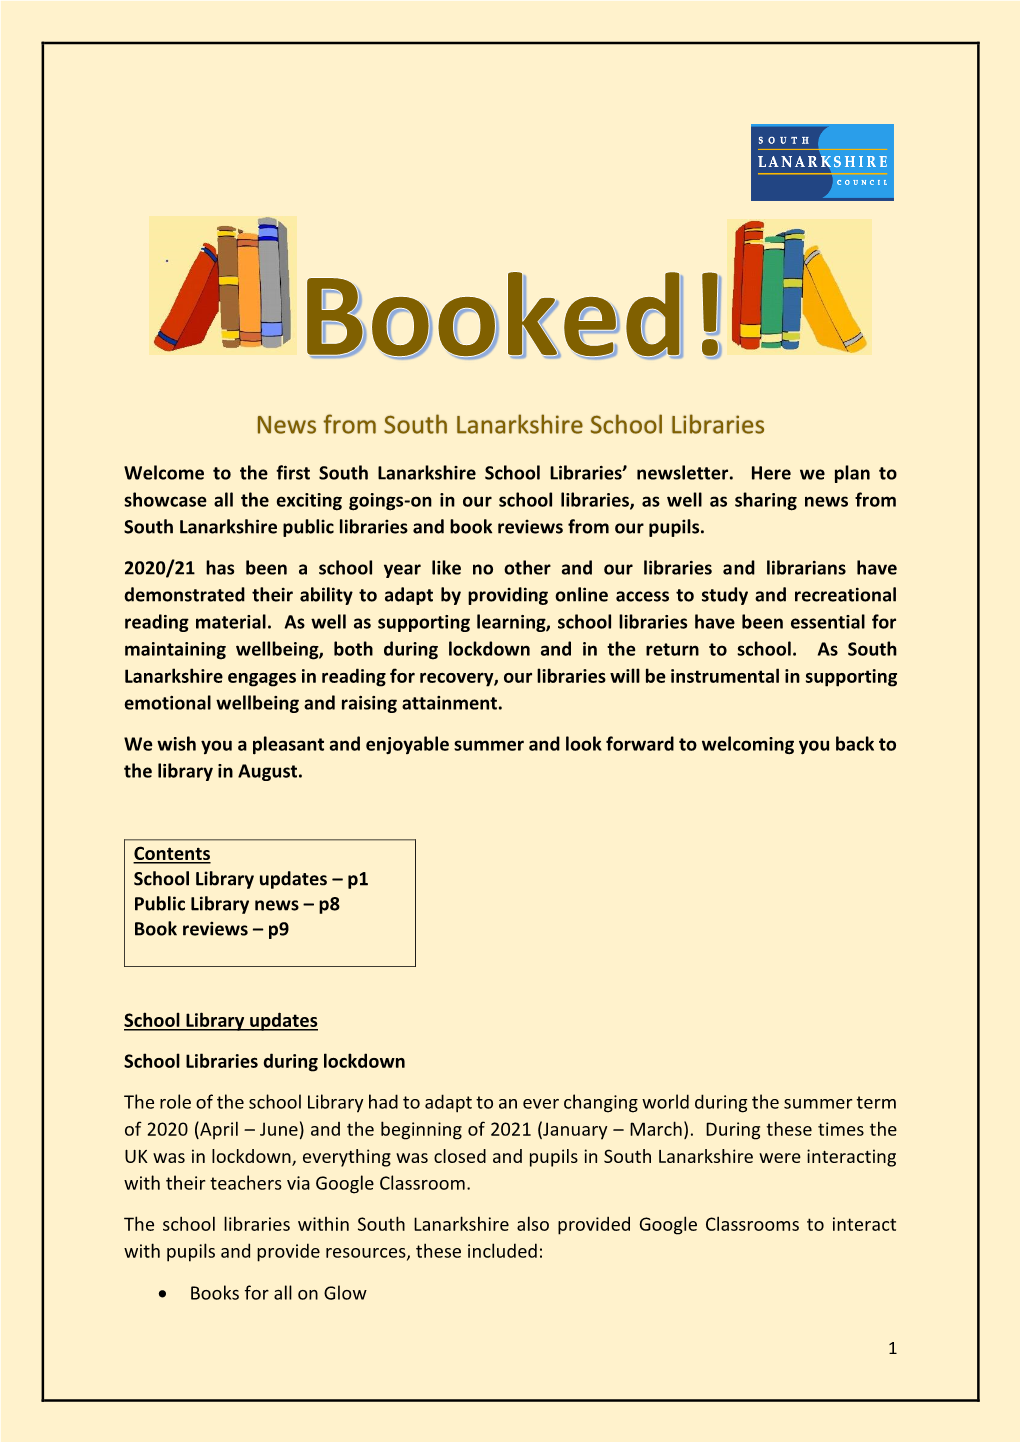 News from South Lanarkshire School Libraries